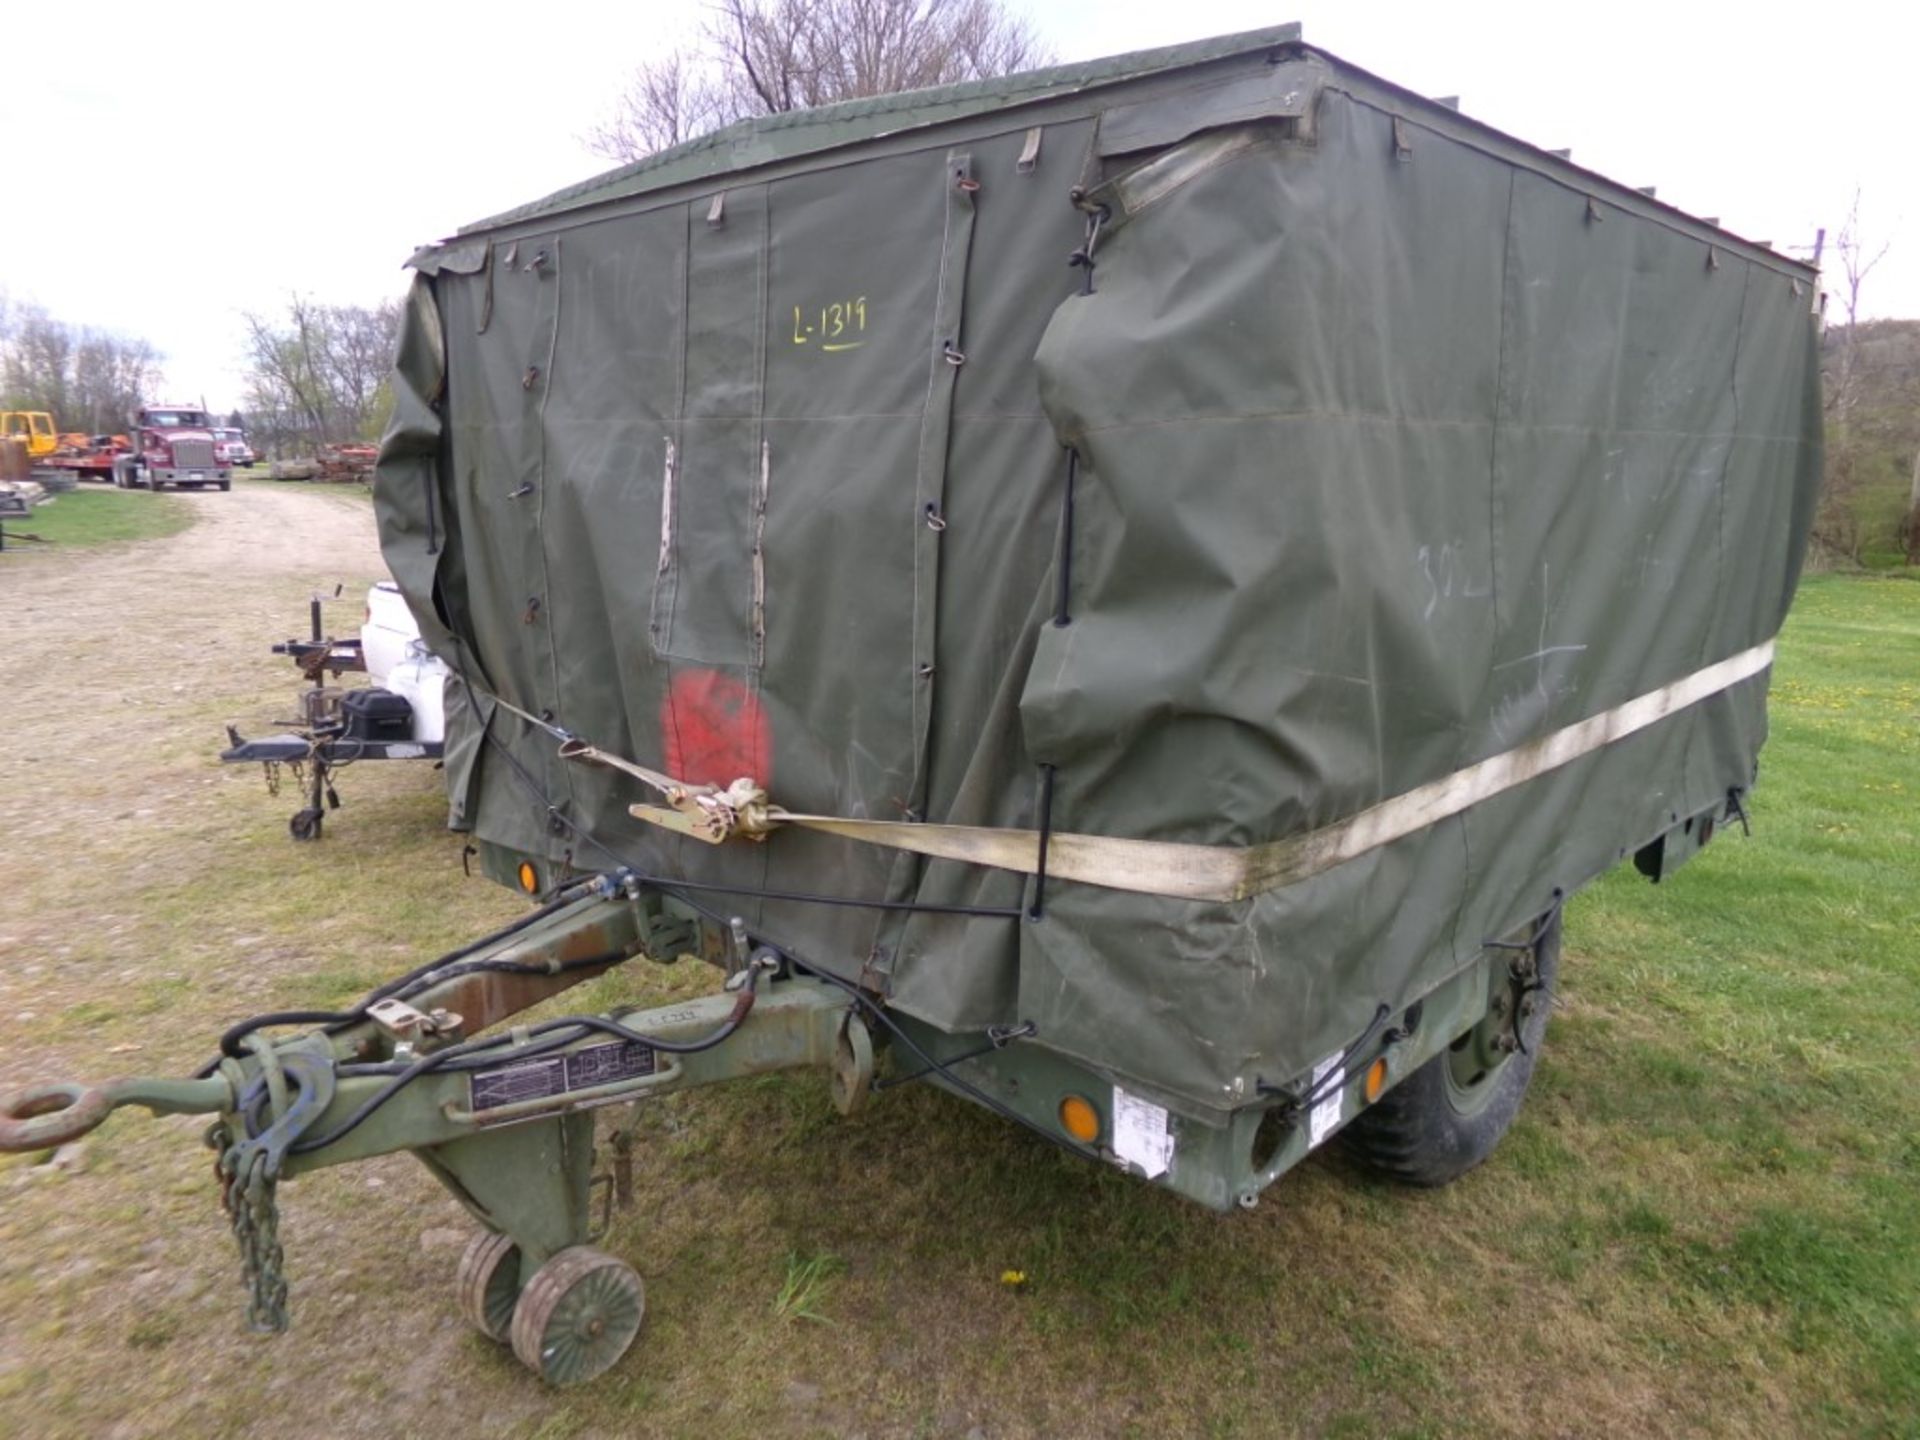 Military ''Kitchen Field Trailer'' with Soft Cover, 1492/1492, Equipped with Propane Kitchen